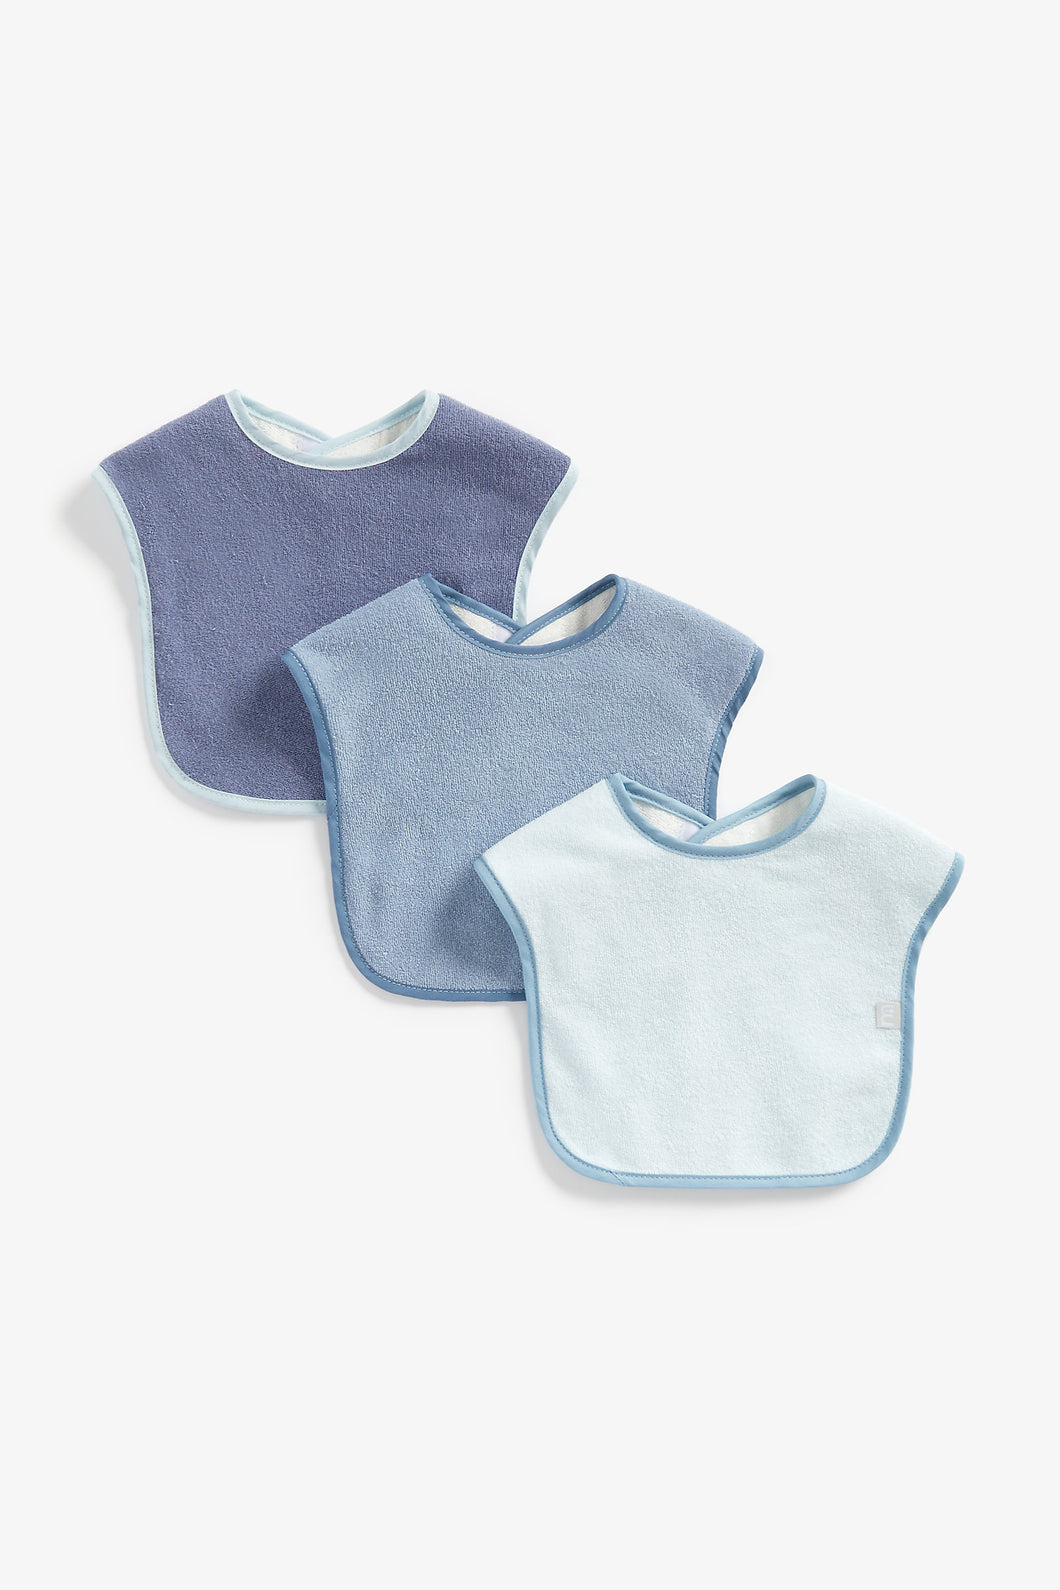 Mothercare Blue Toddler Bibs - 3 Pack